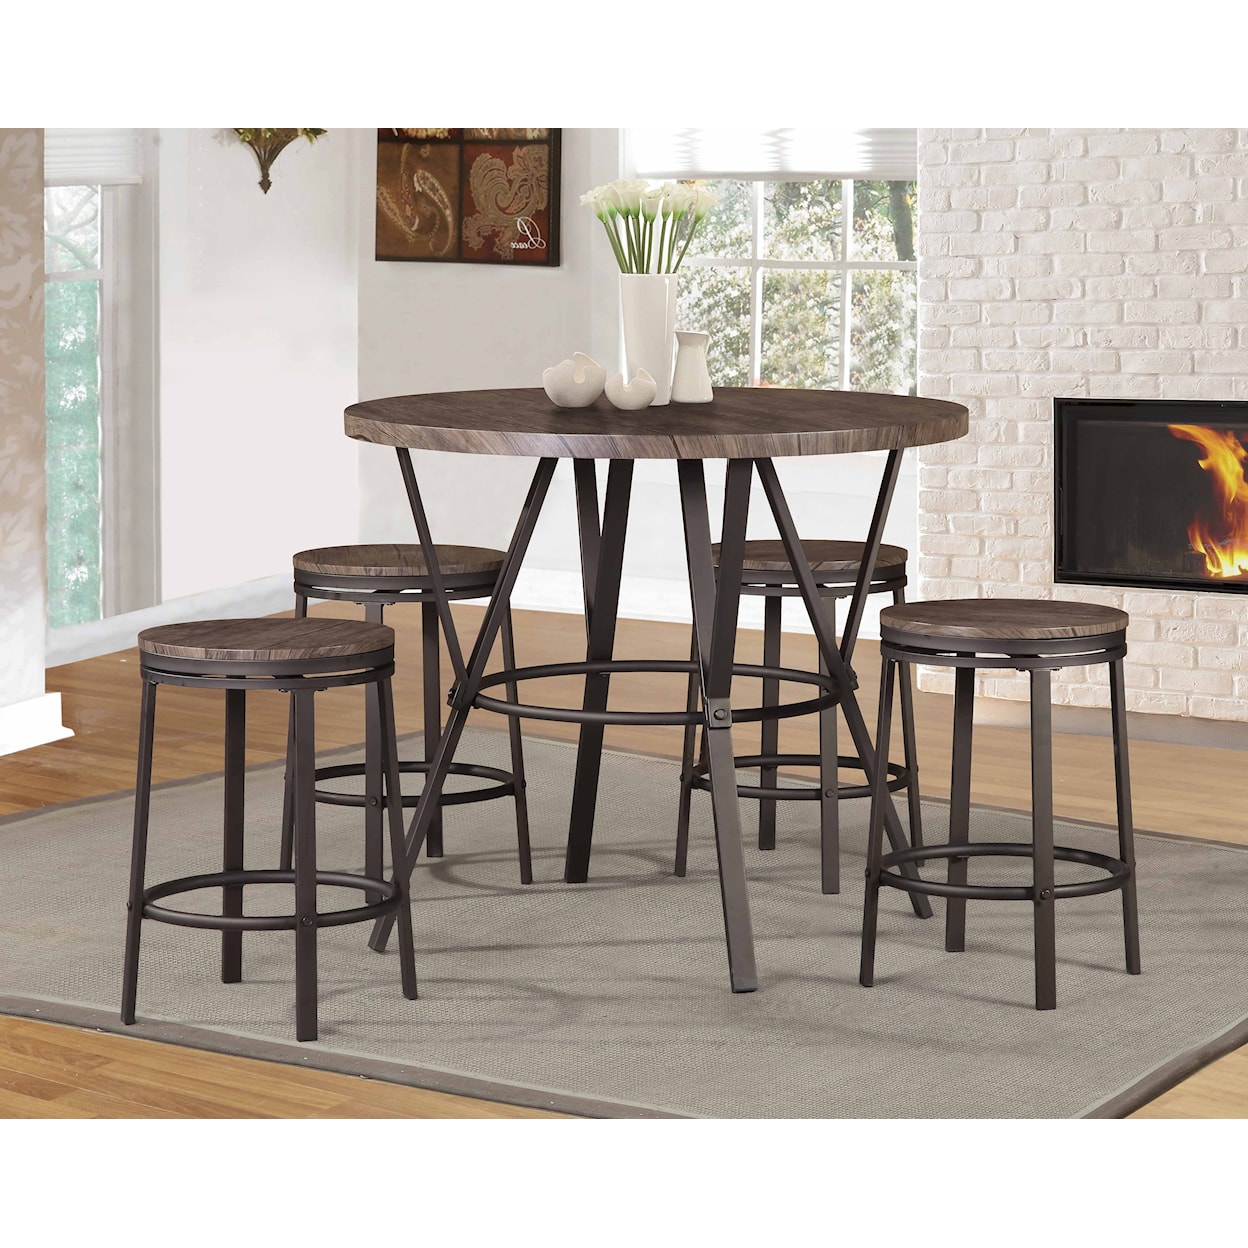 Milton Greens Stars Counter Height Dining EUGENE BROWN 5 PIECE PUB SET |